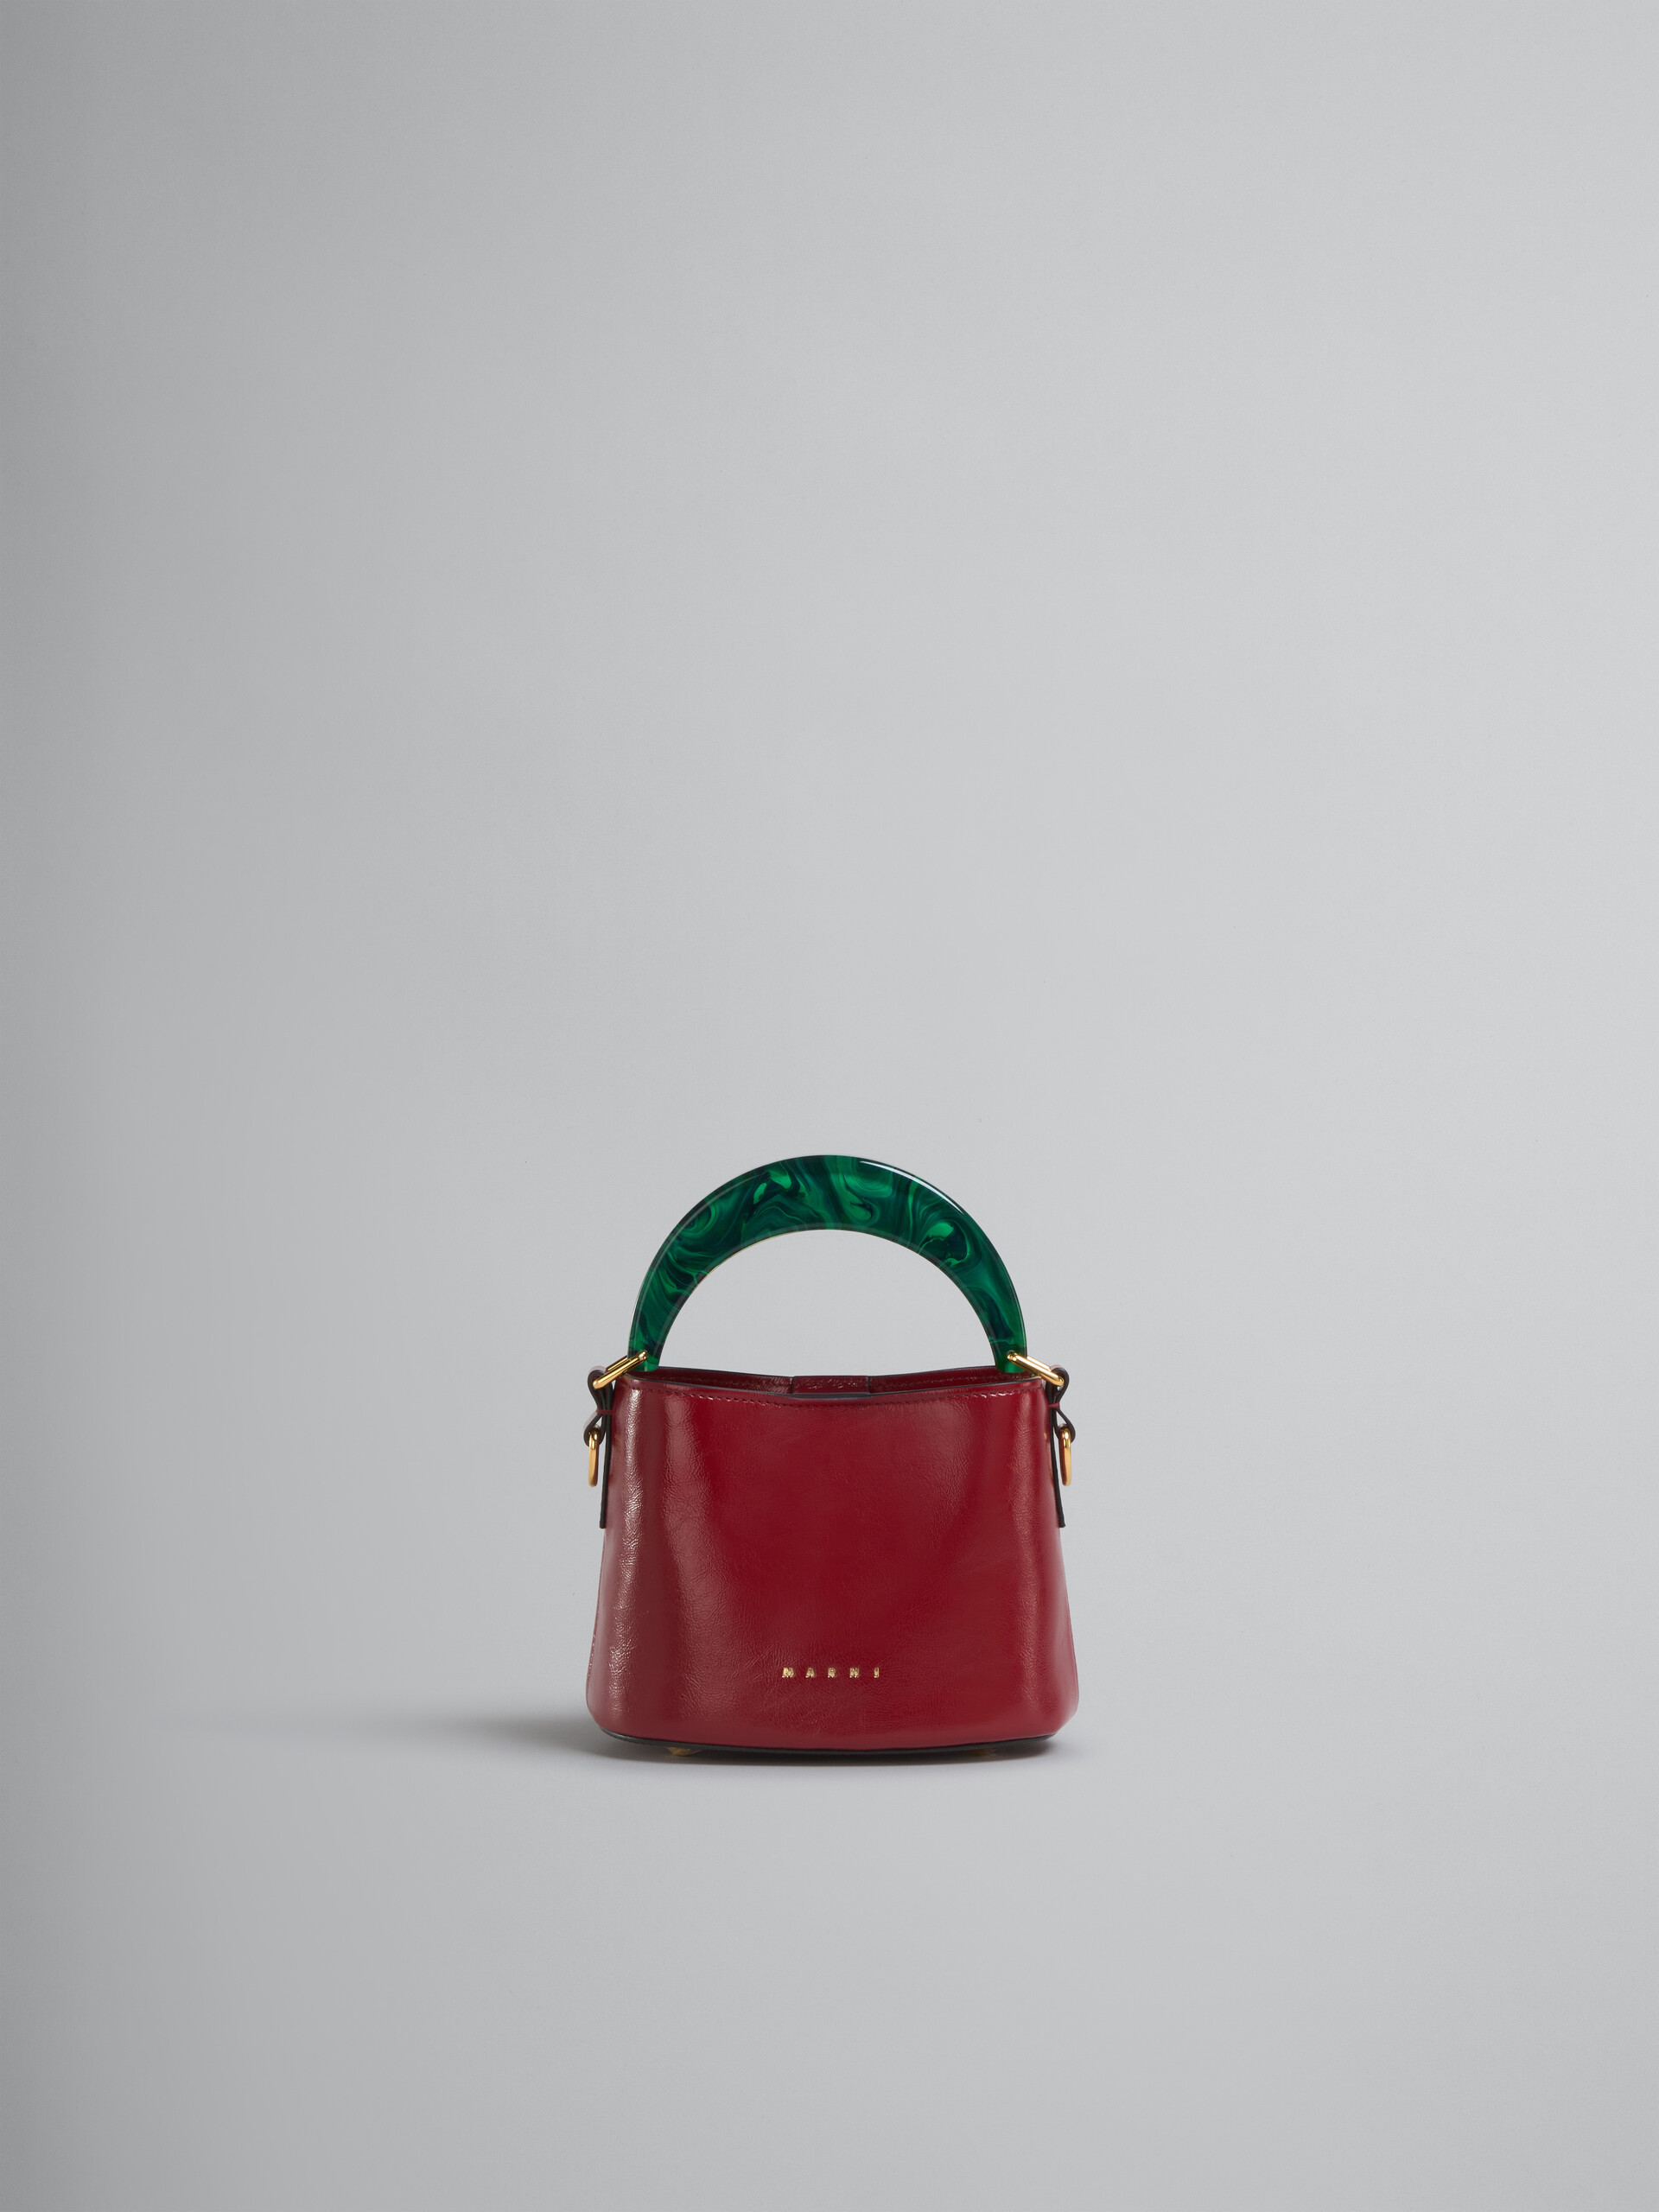 Venice Mini Bucket Bag in ruby red patent leather - Shoulder Bag - Image 1